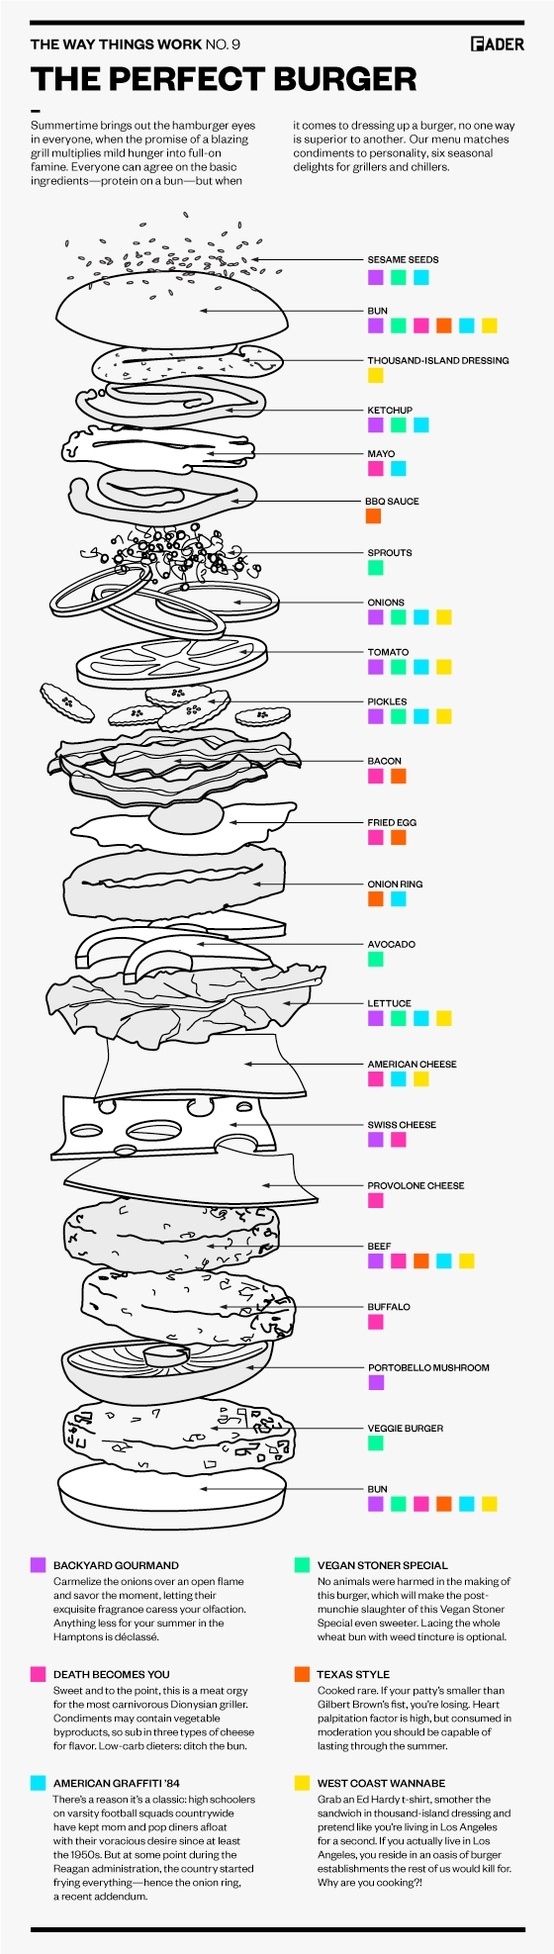 food stacking order - Fader The Way Things Work No.9 The Perfect Burger Summertime brings out the hamburger eyes in everyone, when the promise of a blazing grill multiplies mild hunger into fullon famine. Everyone can agree on the basic ingredientsprotein